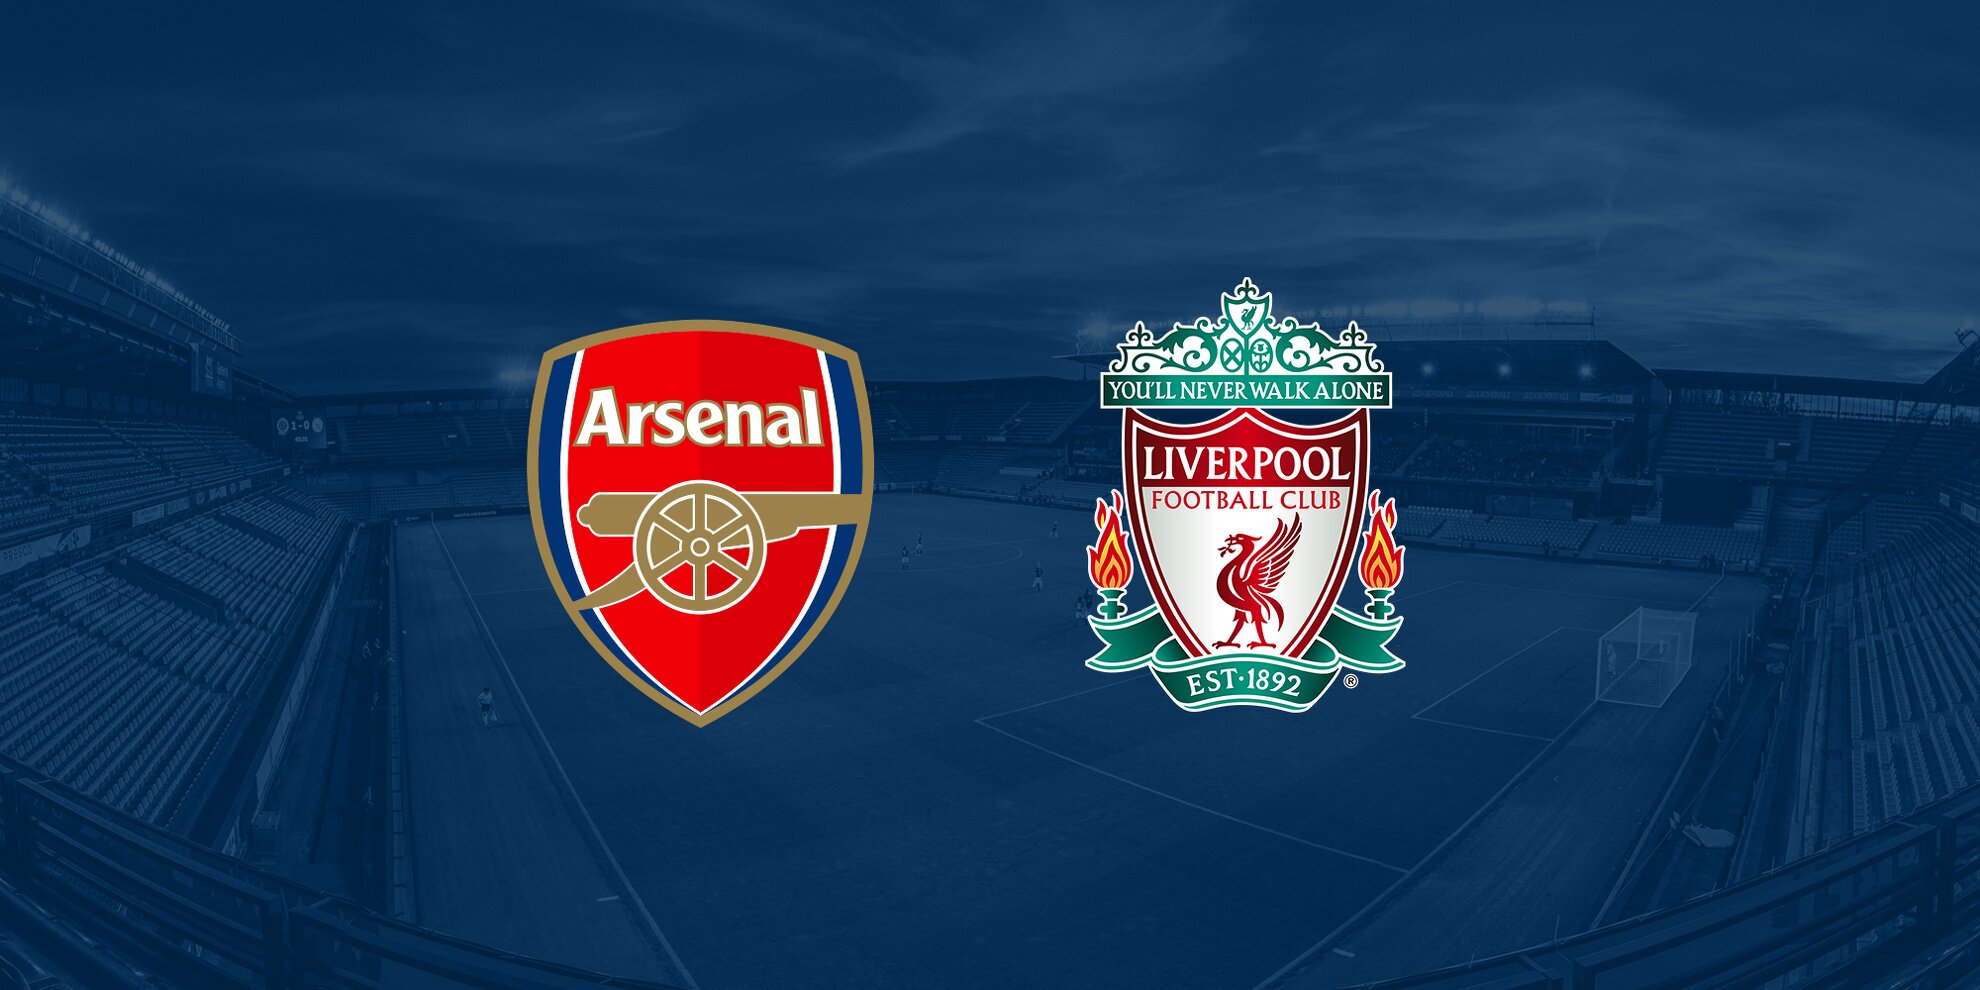 Arsenal vs Liverpool: Match Preview - Kick Off Time, Team News, Predicted Starting XI - 9 Oct, 2022